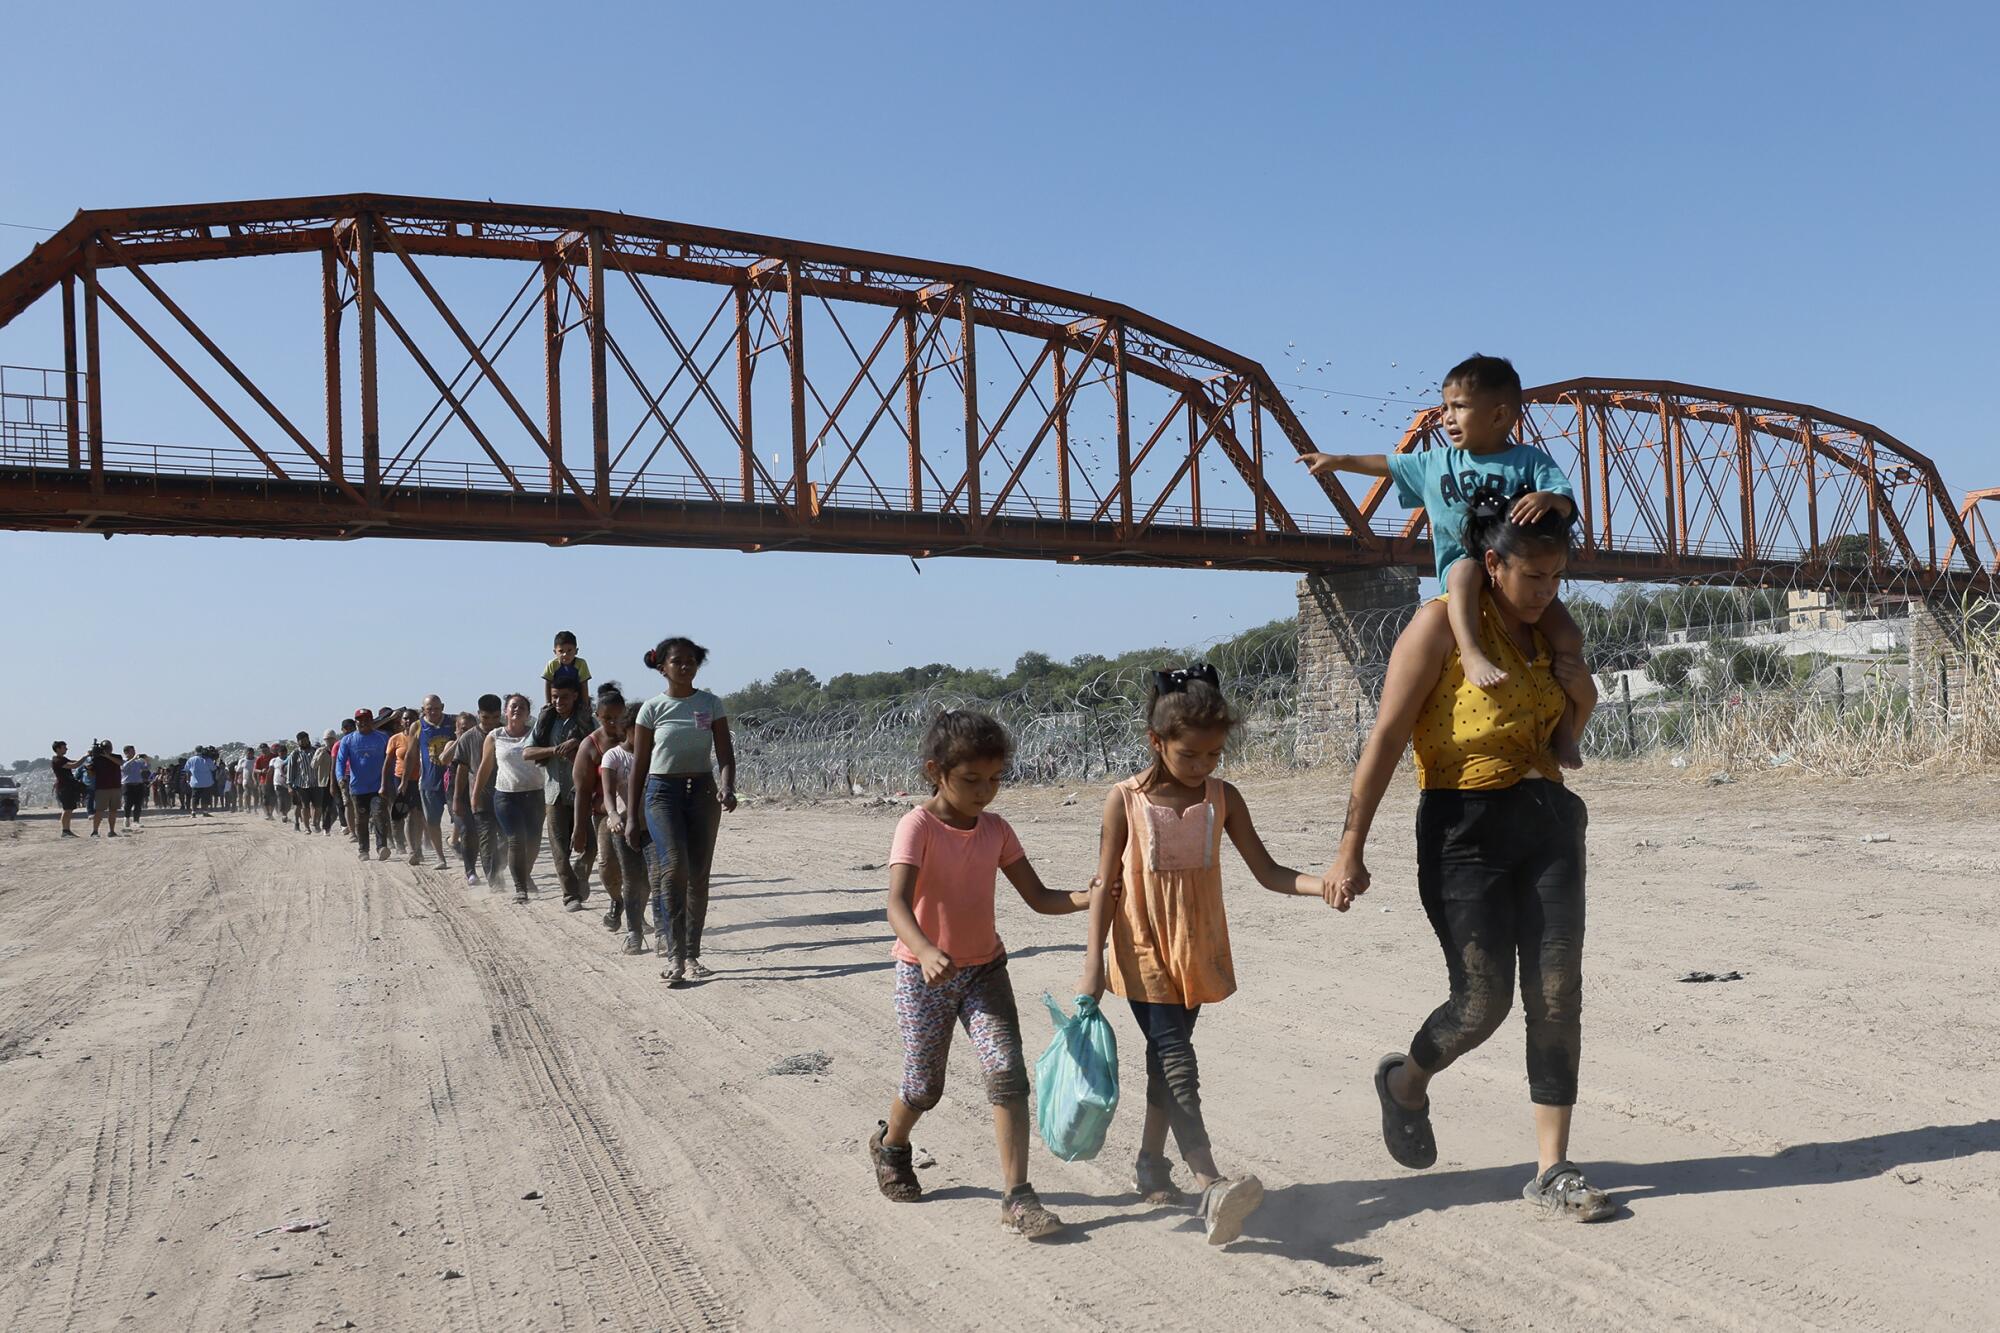 Hundreds of migrants walk in a long line on a sandy track under a bridge